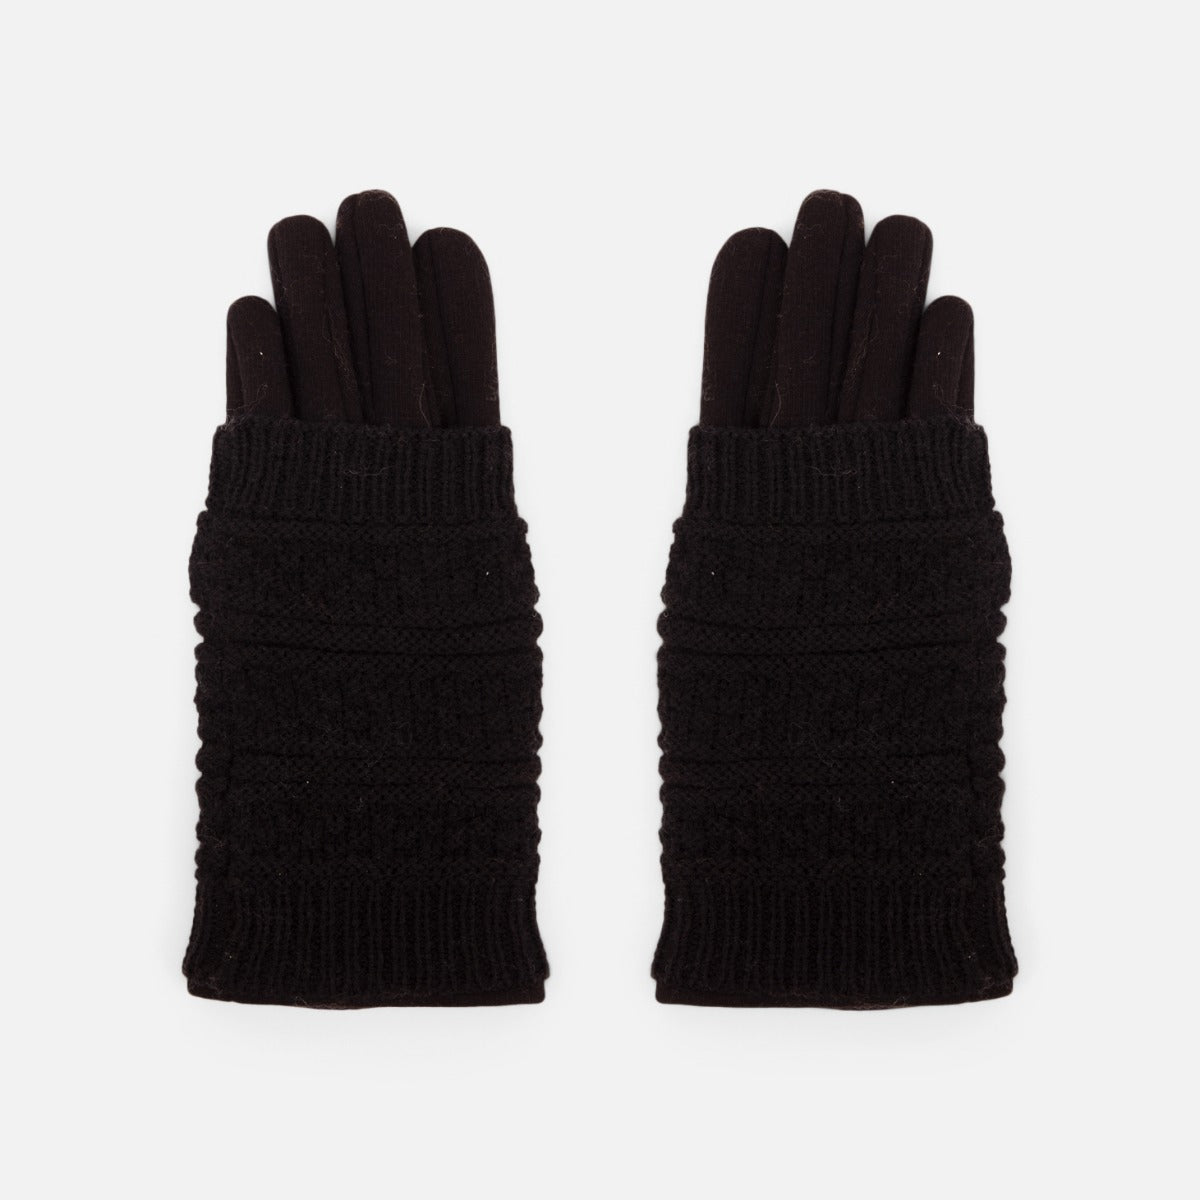 Black touch gloves with added knitting